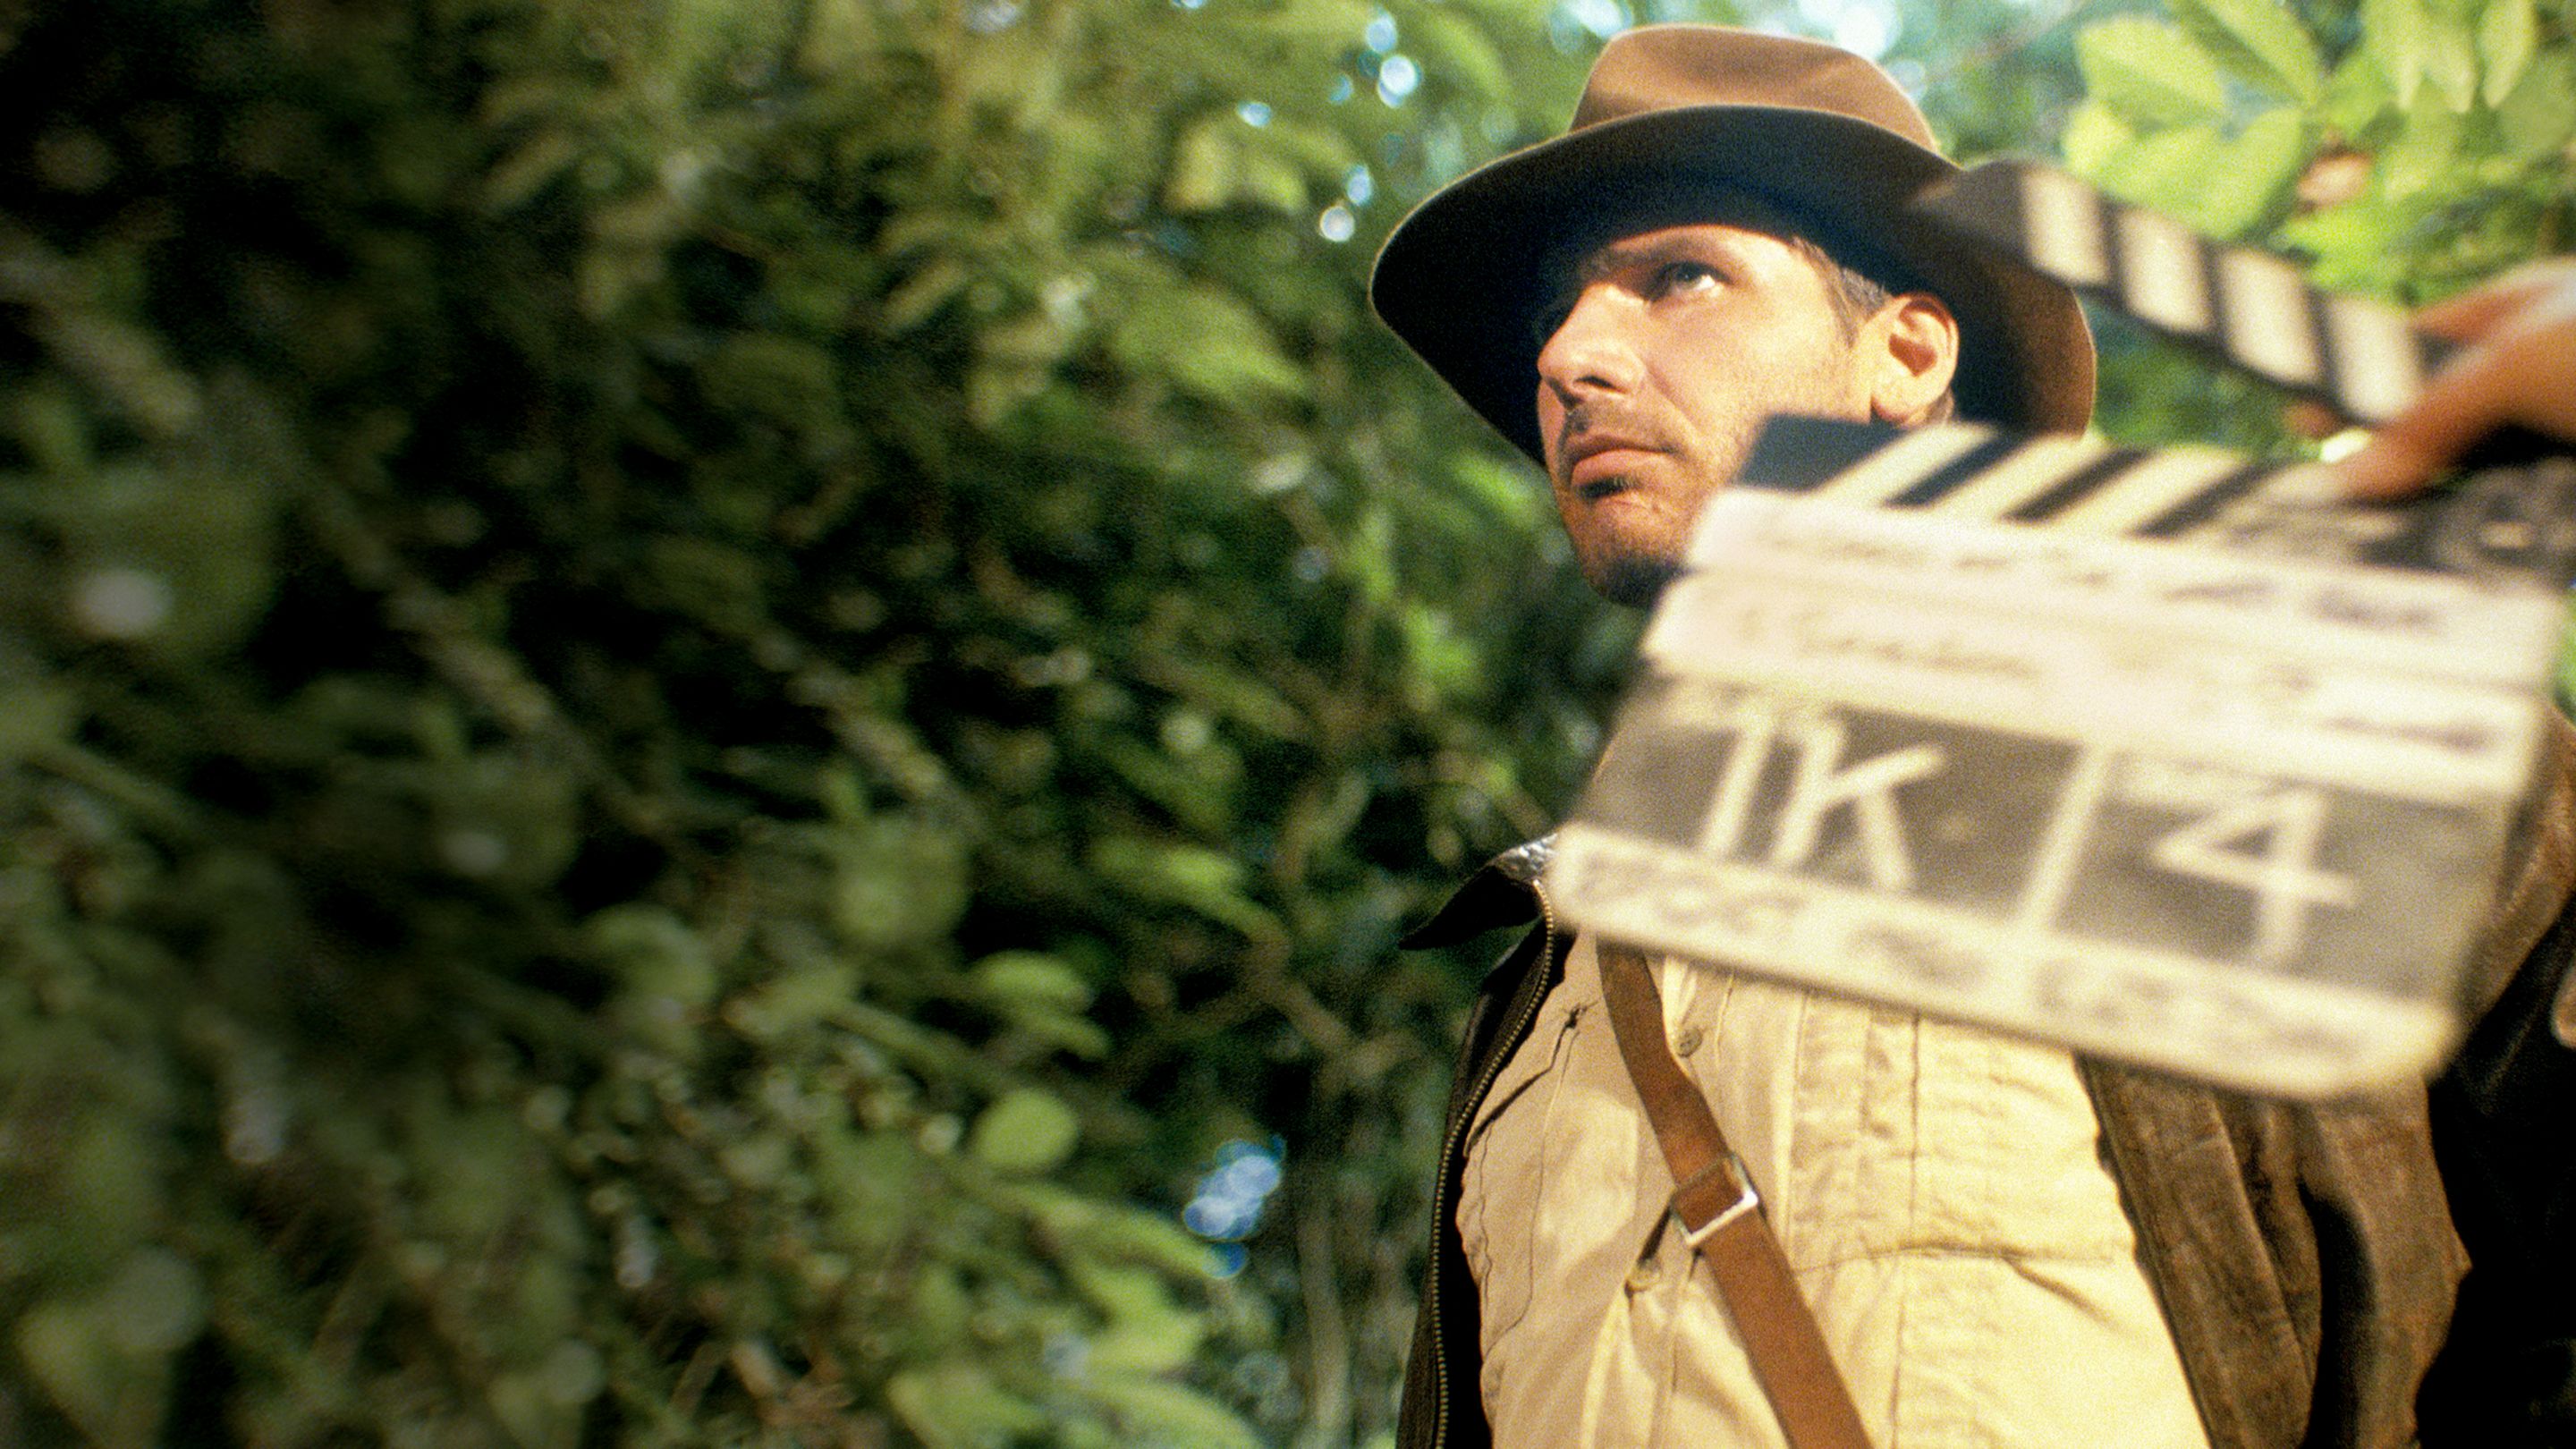 Watch Timeless Heroes: Indiana Jones and Harrison Ford